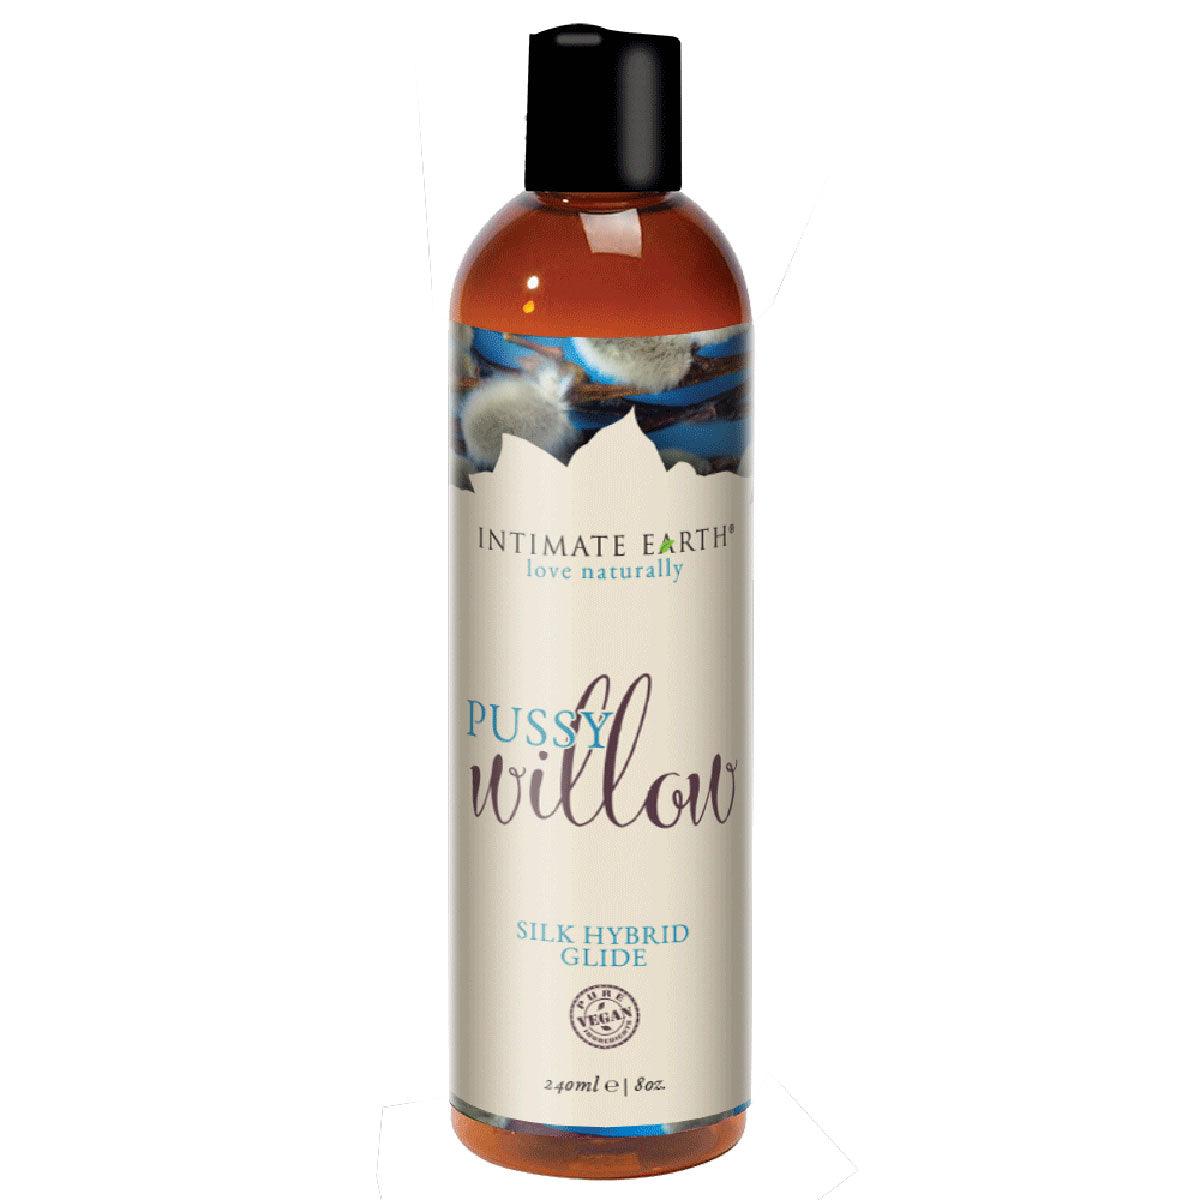 Intimate Earth Pussy Willow Silk Hybrid Glide 8oz - shop enby